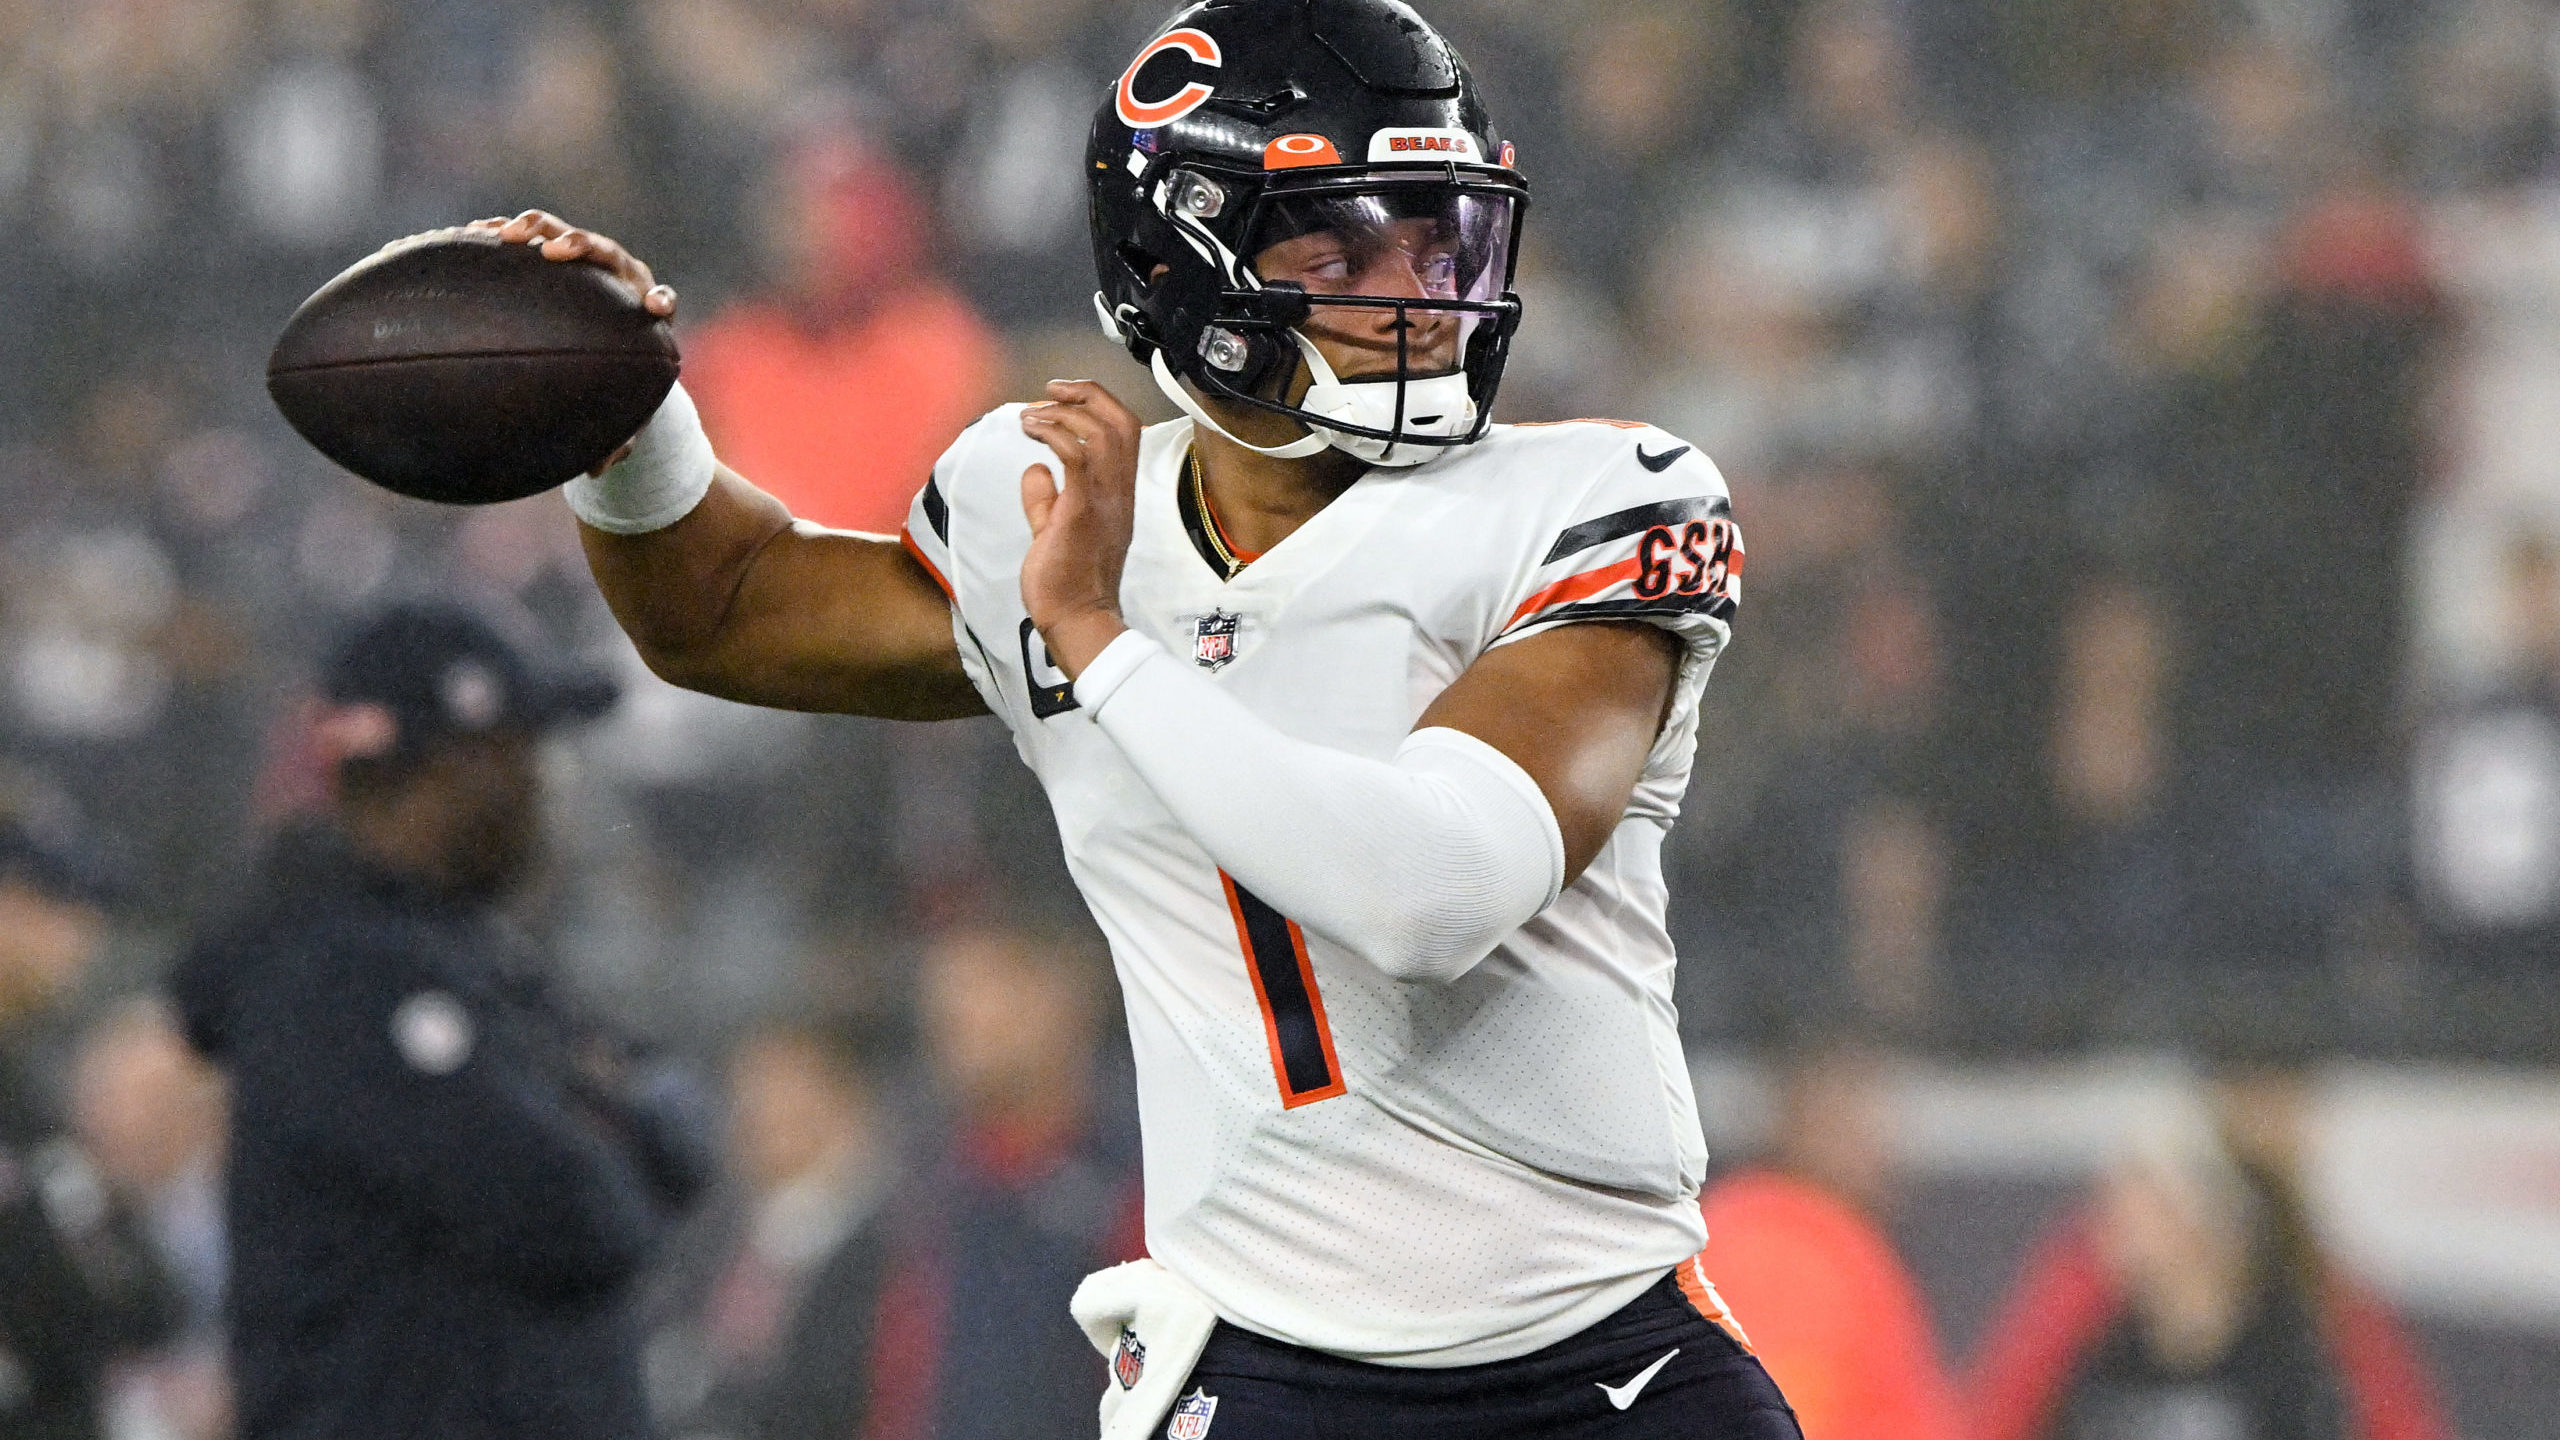 Justin Fields struggles again as Bears ride run game to win